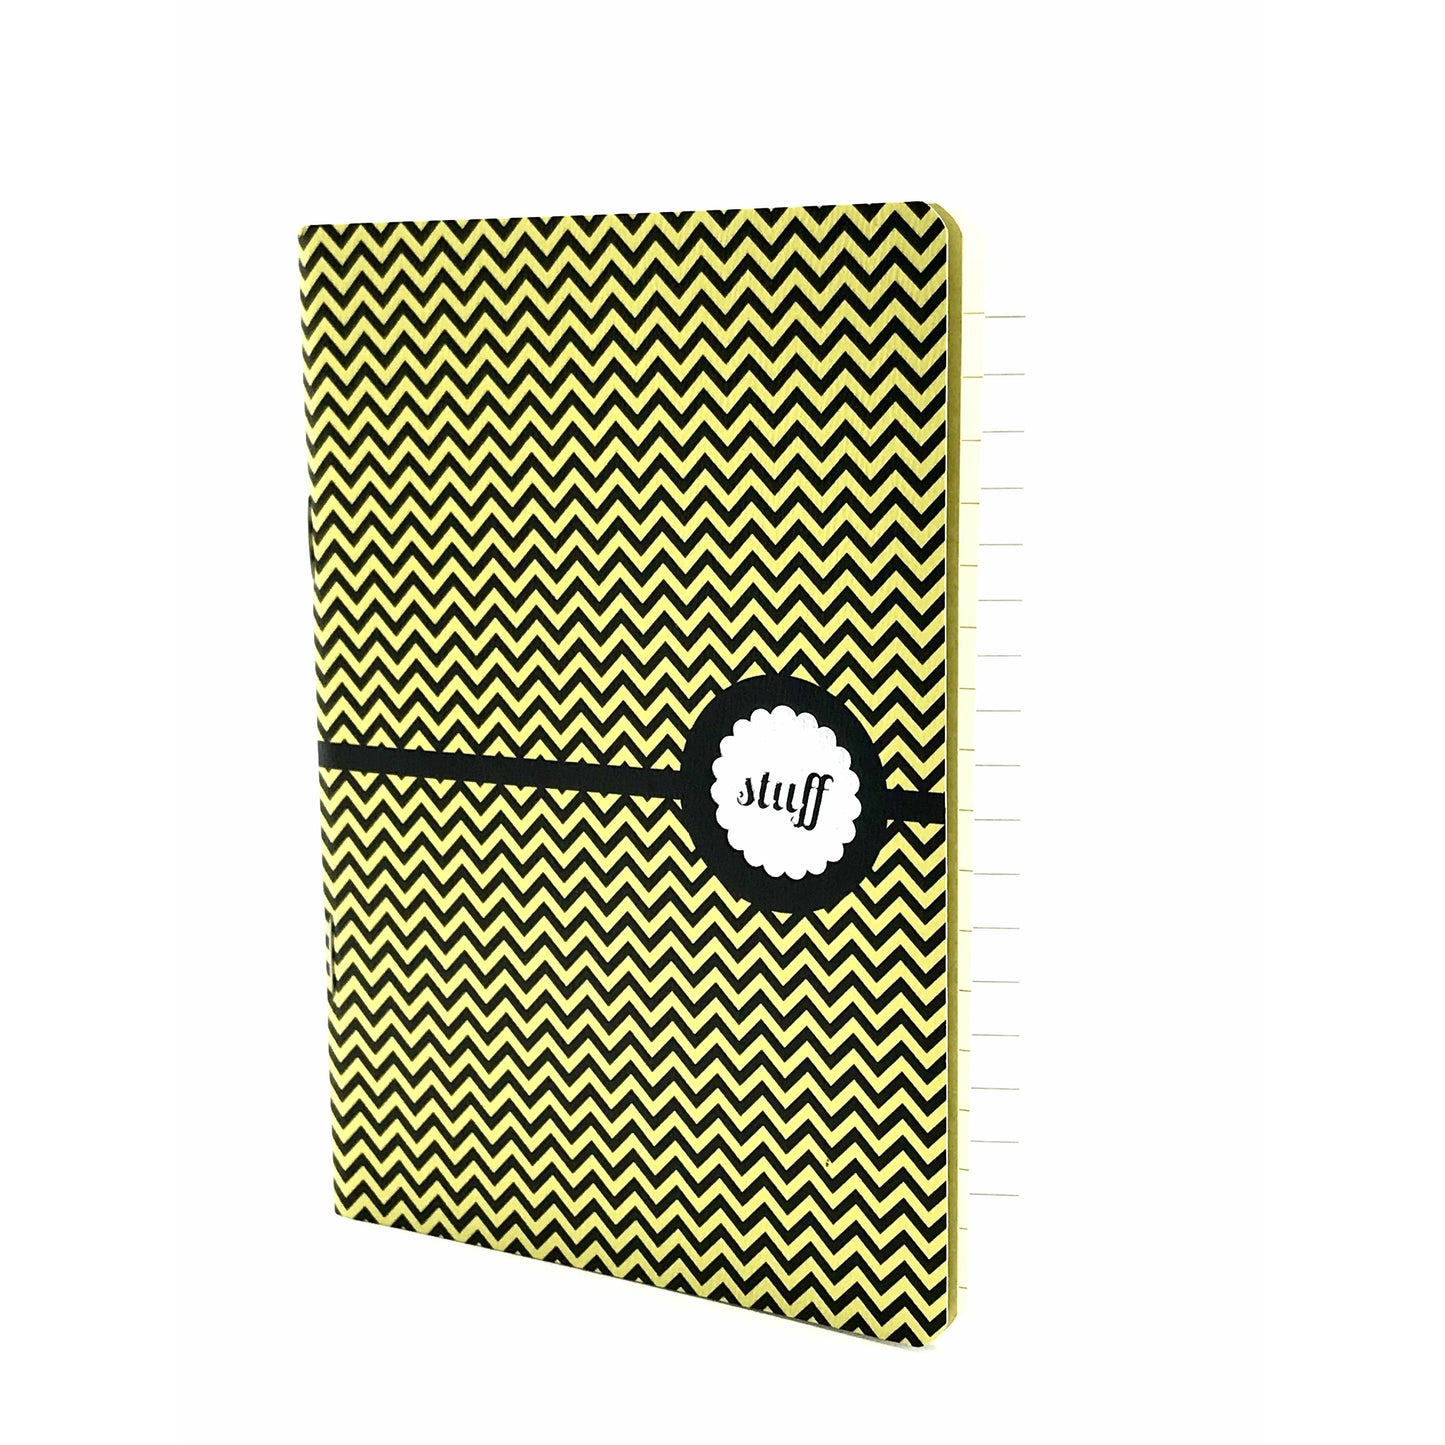 ZigZag Soft Cover Pocket Ruled Notebook 32 Sheets A6